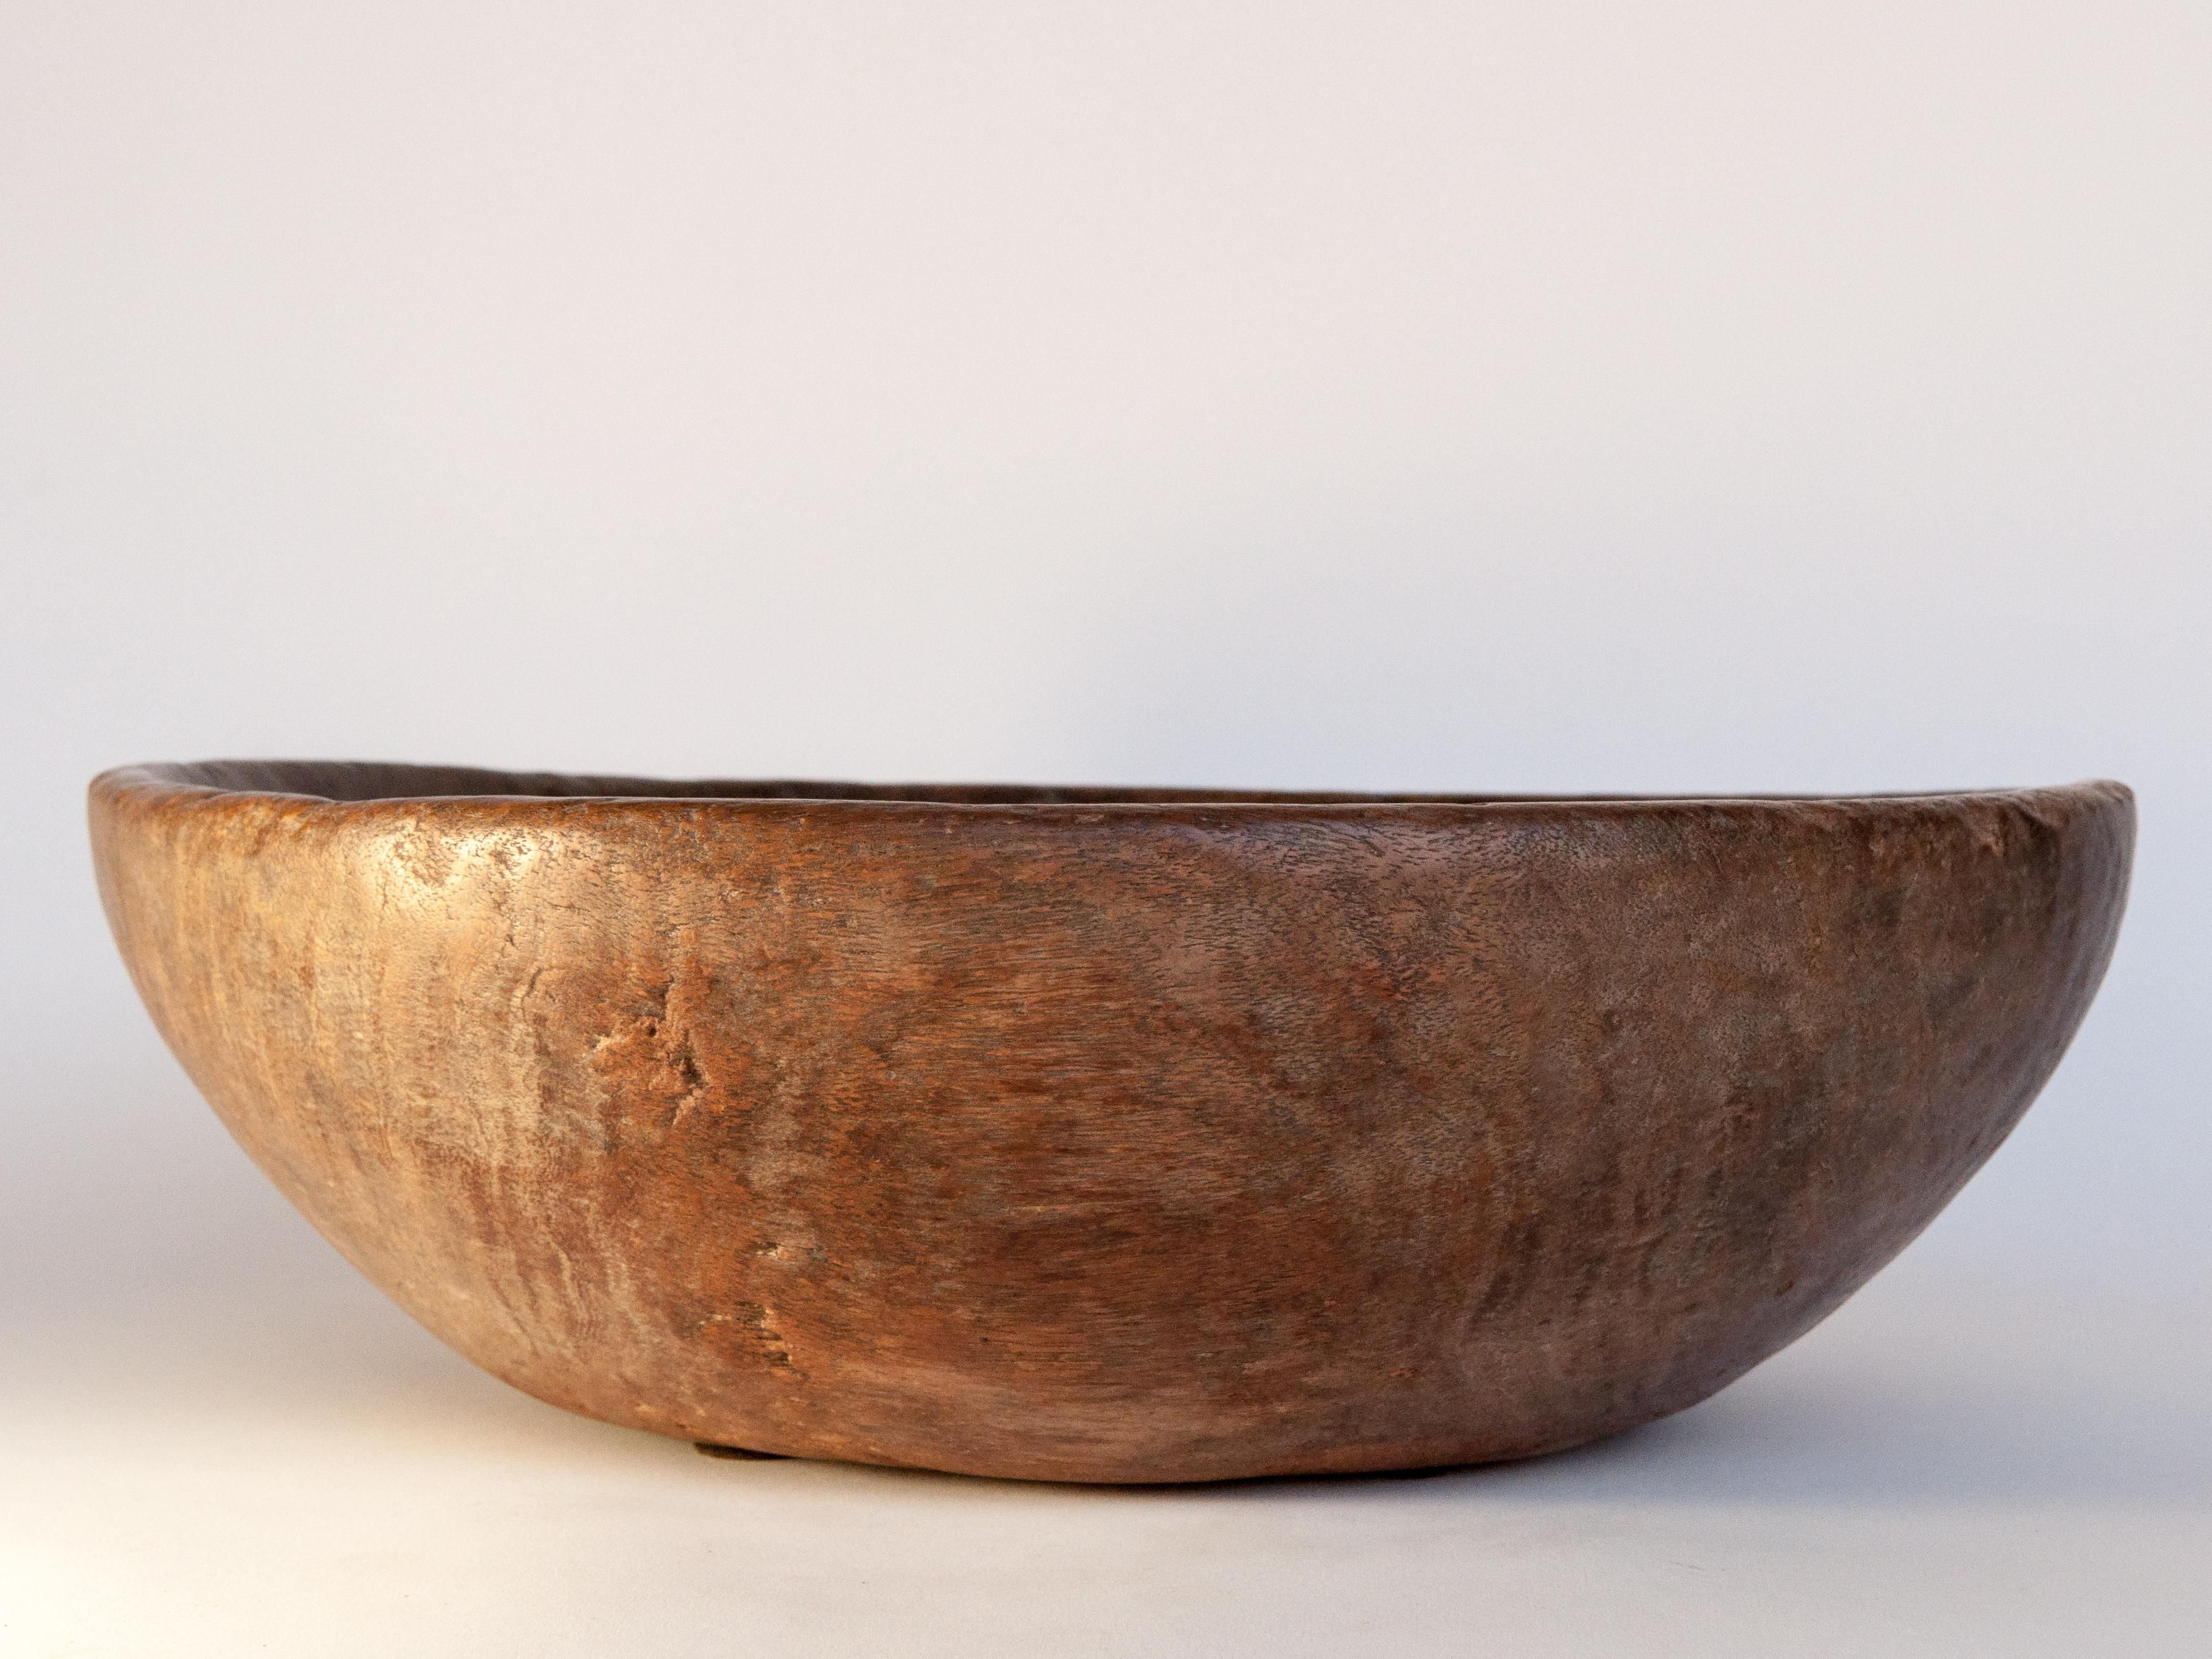 Hardwood Old Rustic Wooden Bowl from the Nepal Himal, Mid-20th Century